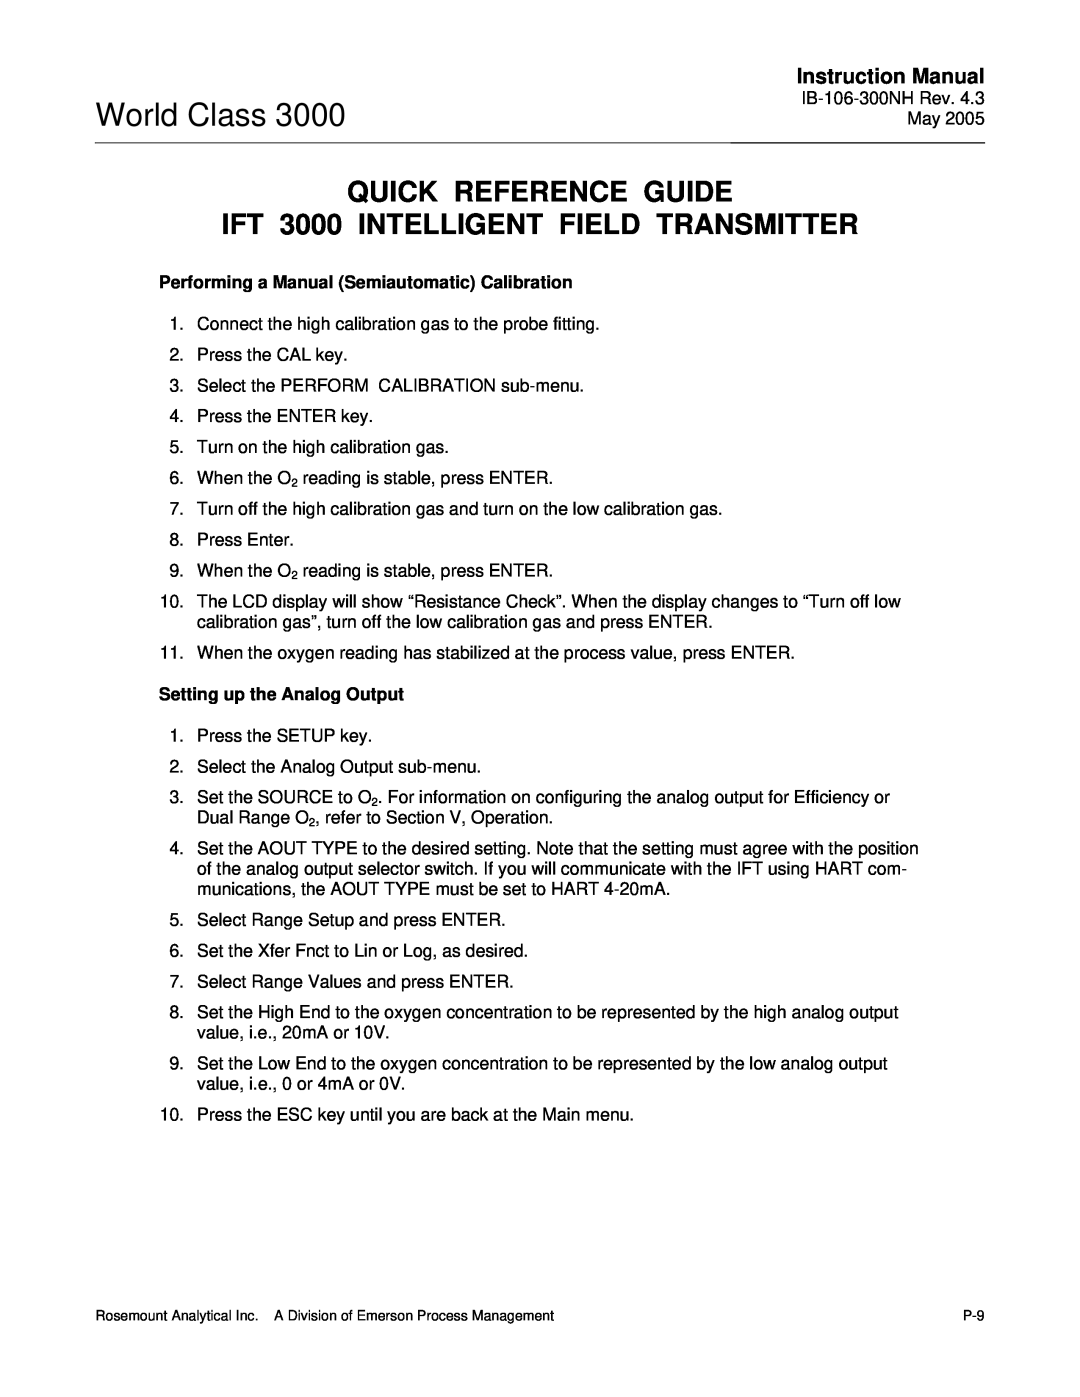 Emerson Quick Reference Guide, IFT 3000 INTELLIGENT FIELD TRANSMITTER, World Class, Instruction Manual 